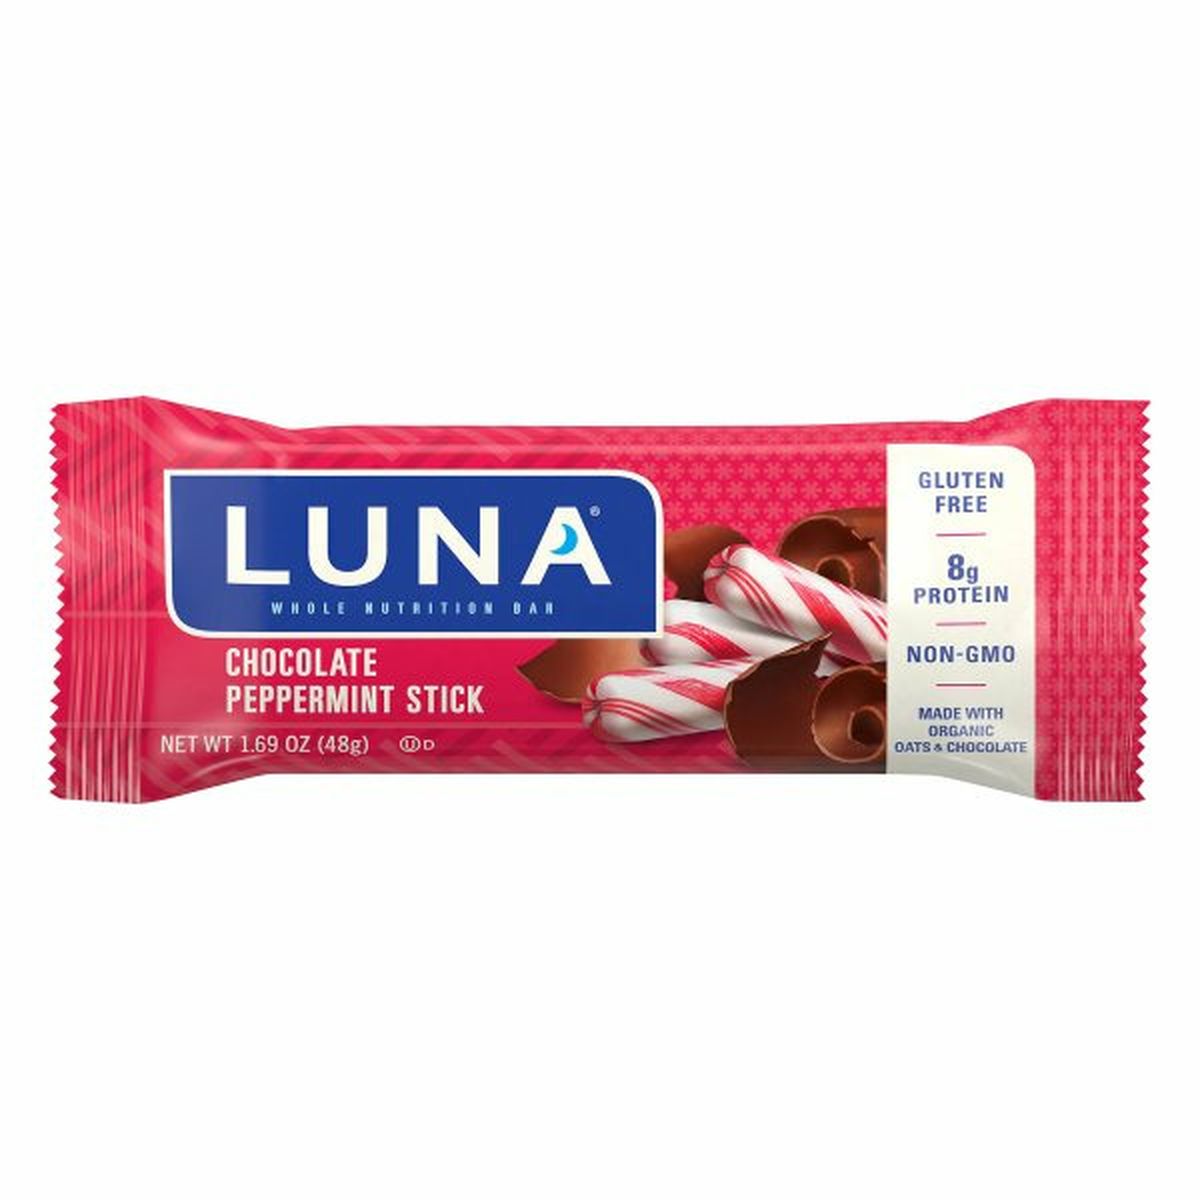 Calories in Luna Nutrition Bar, Whole, Chocolate Peppermint Stick